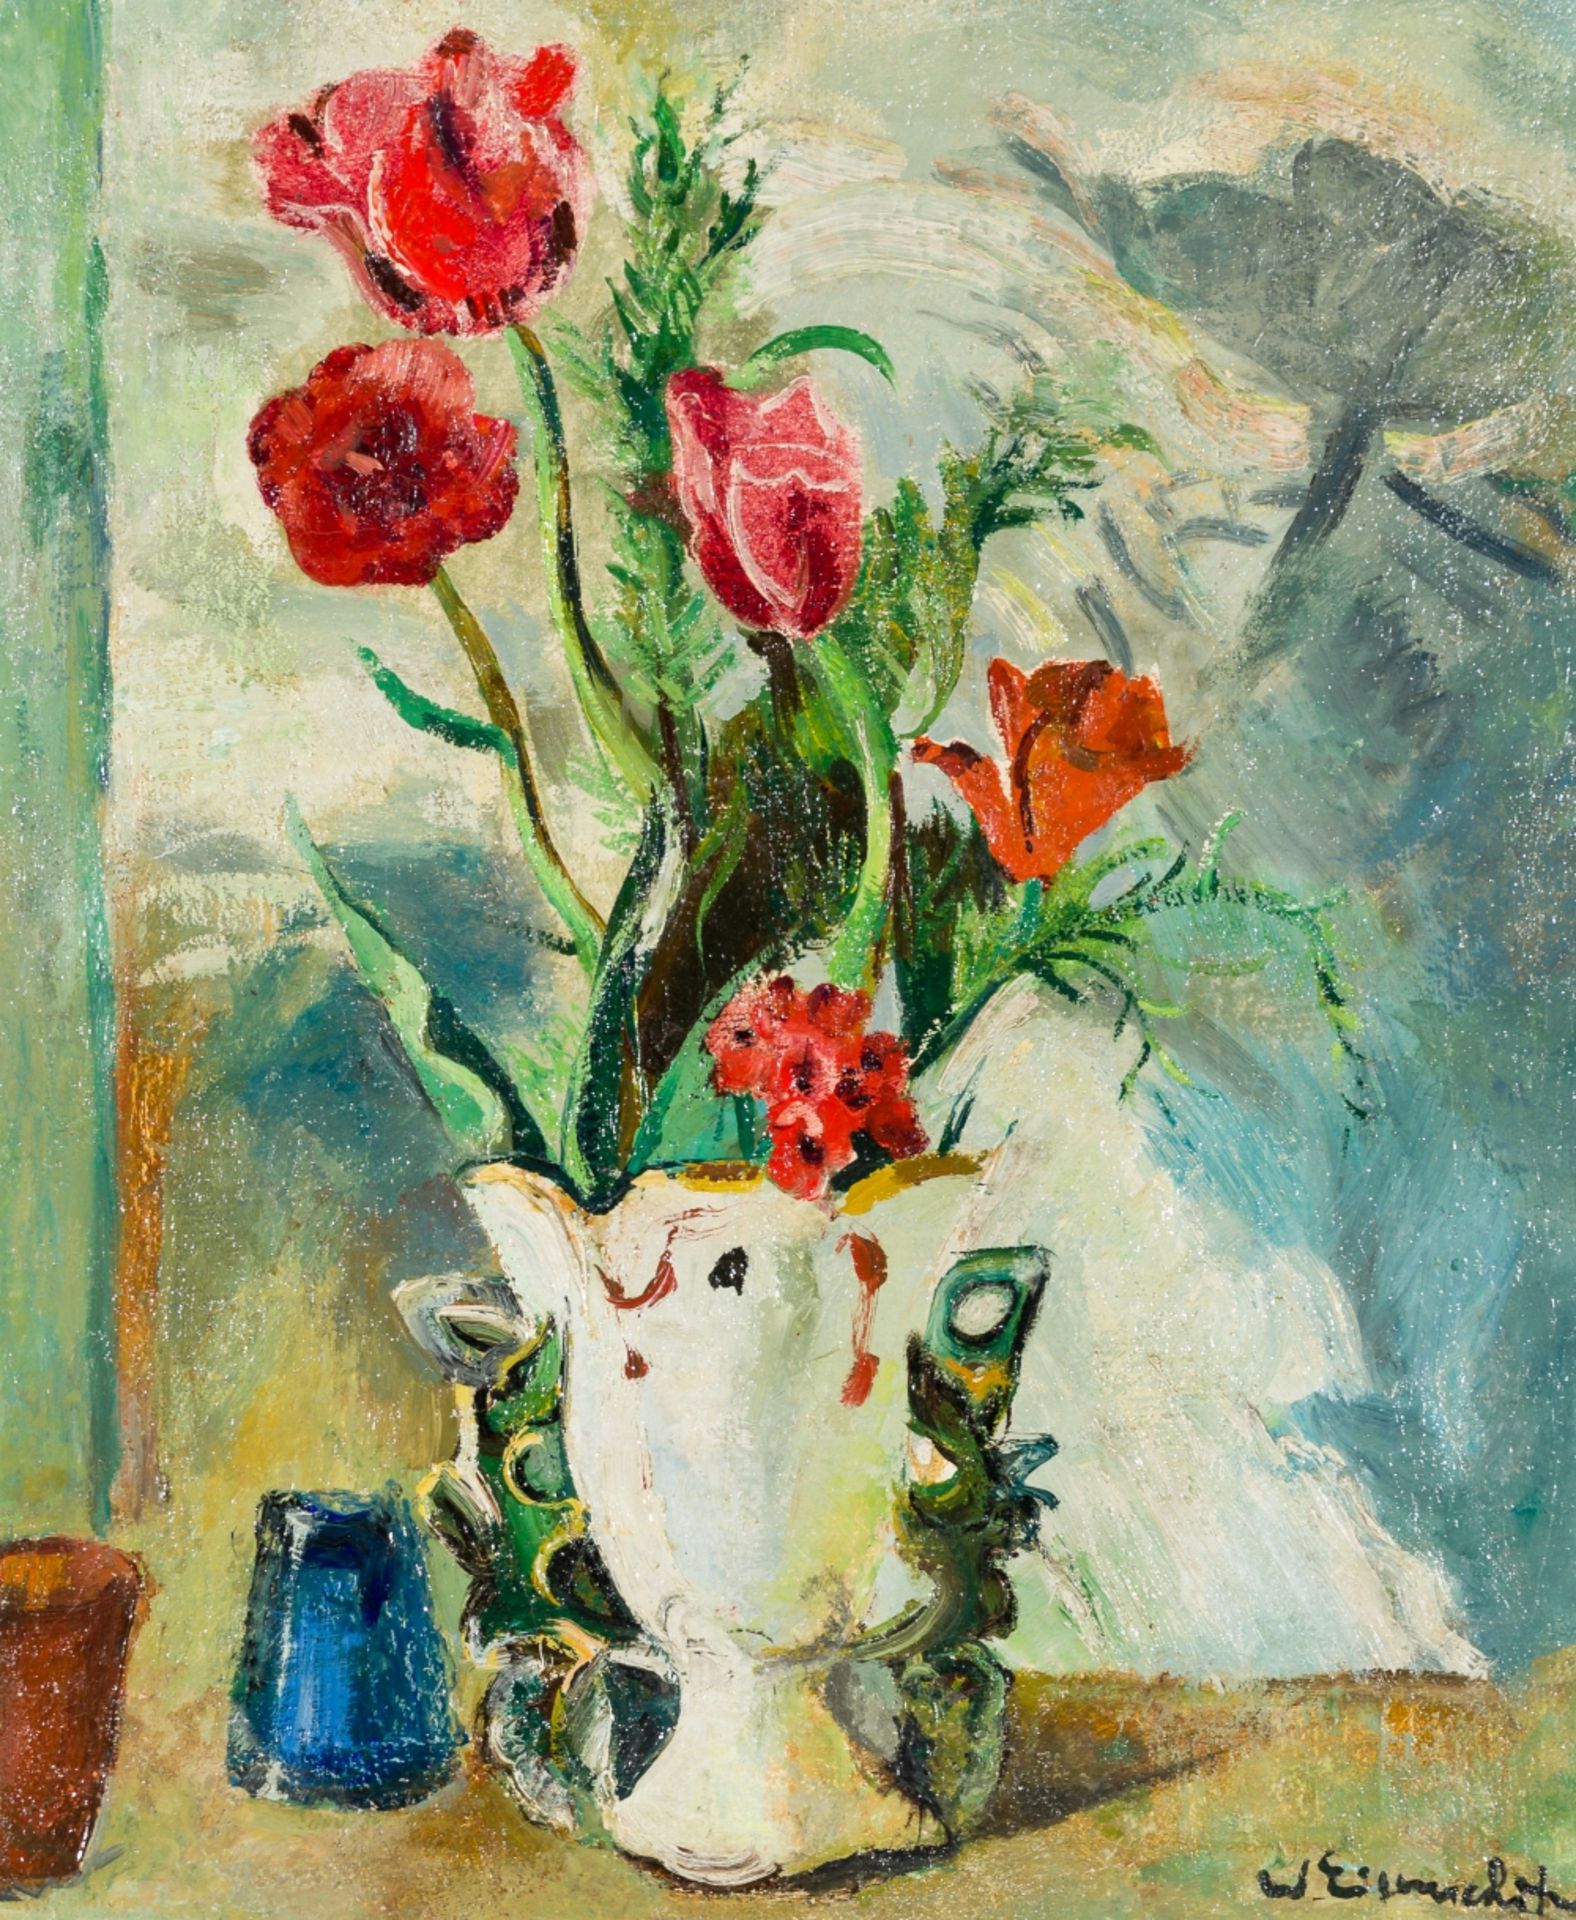 Eisenschitz, Willy(1889 - 1974)Still Life with TulipsOil on canvasSigned lower right21,7 x 18,1